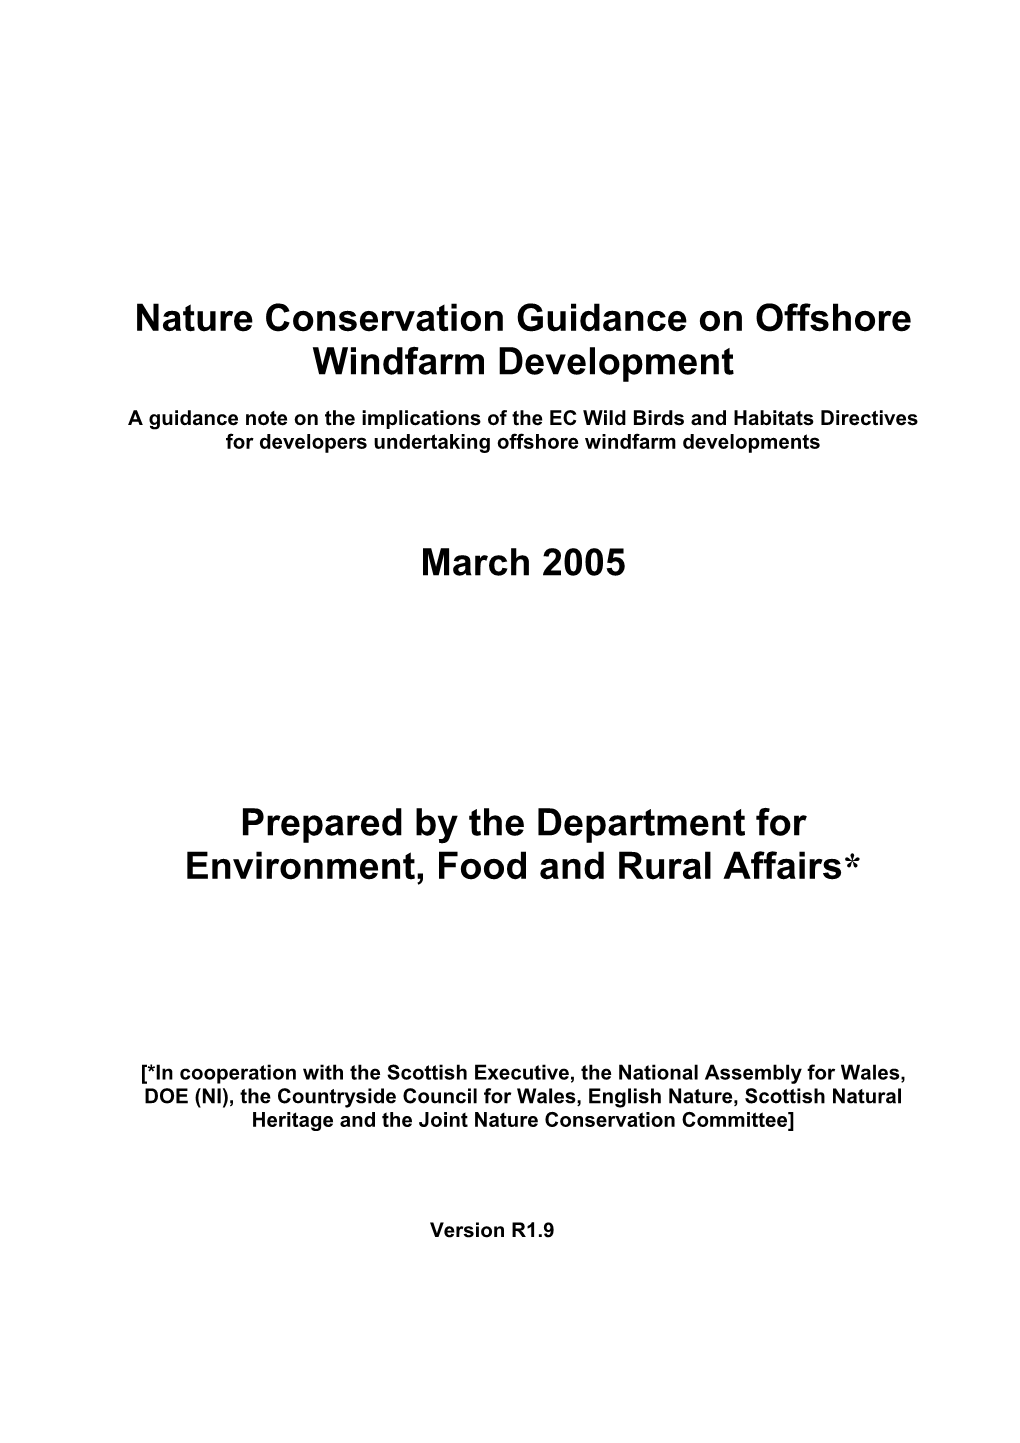 Nature Conservation Guidance on Offshore Windfarm Development